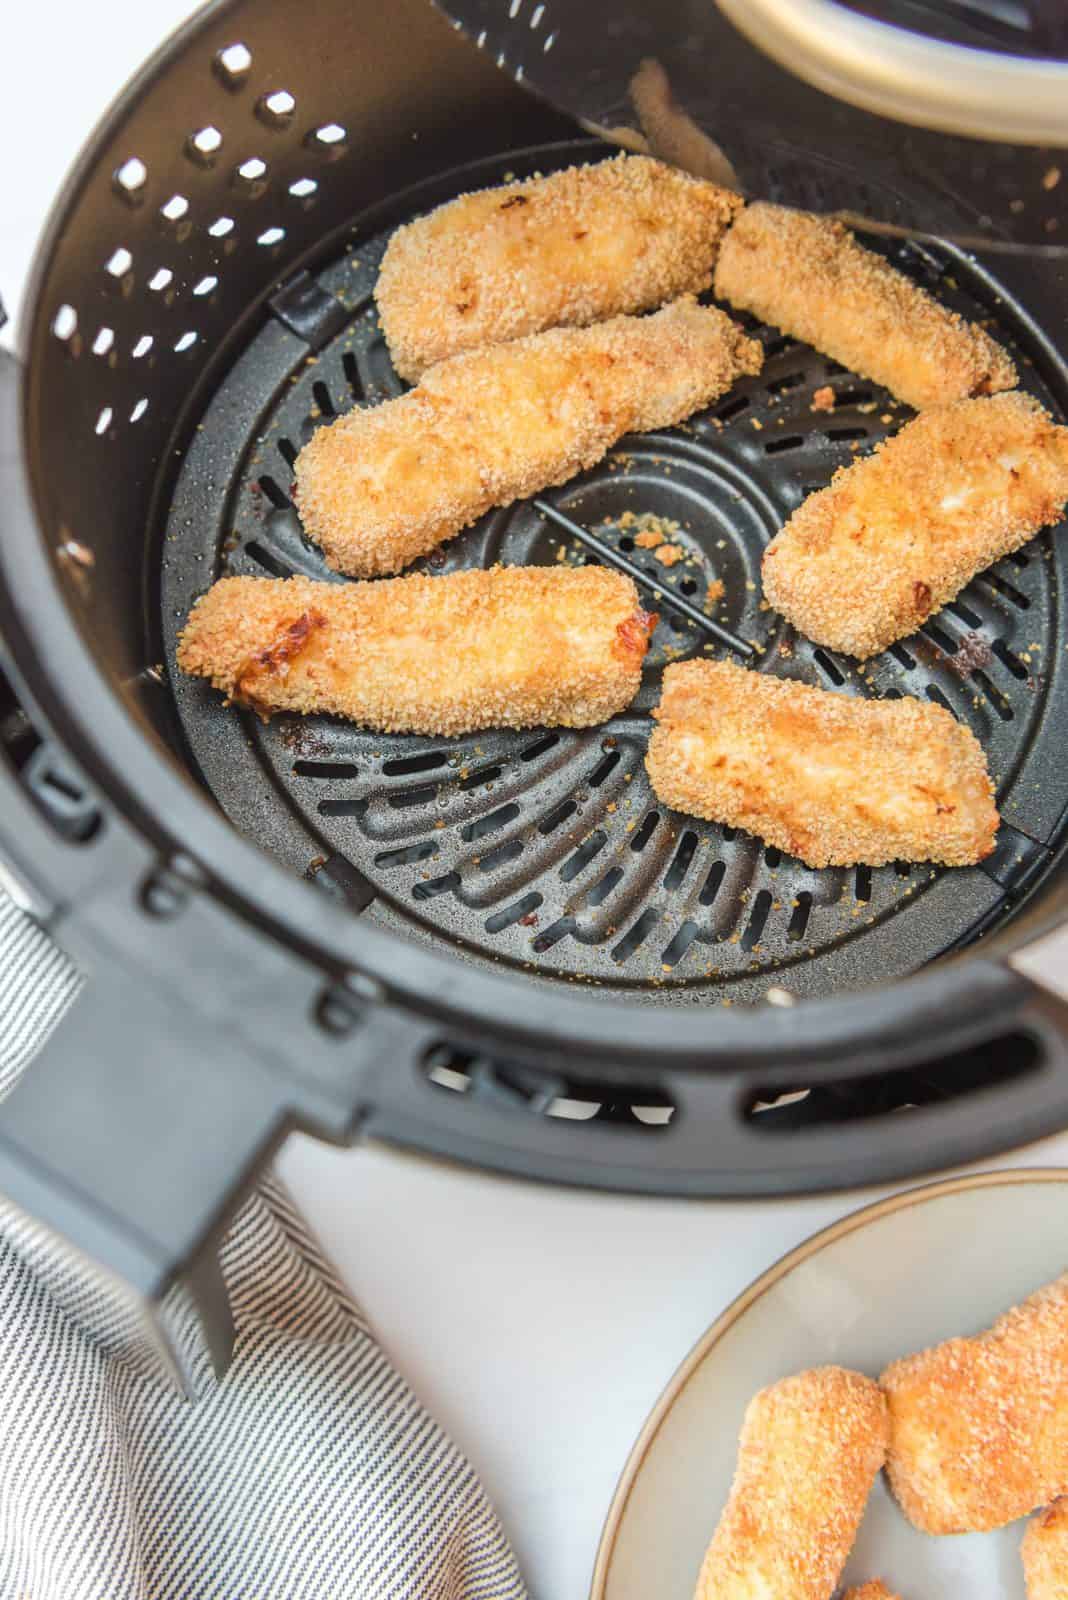 Finished fish sticks in air fryer.